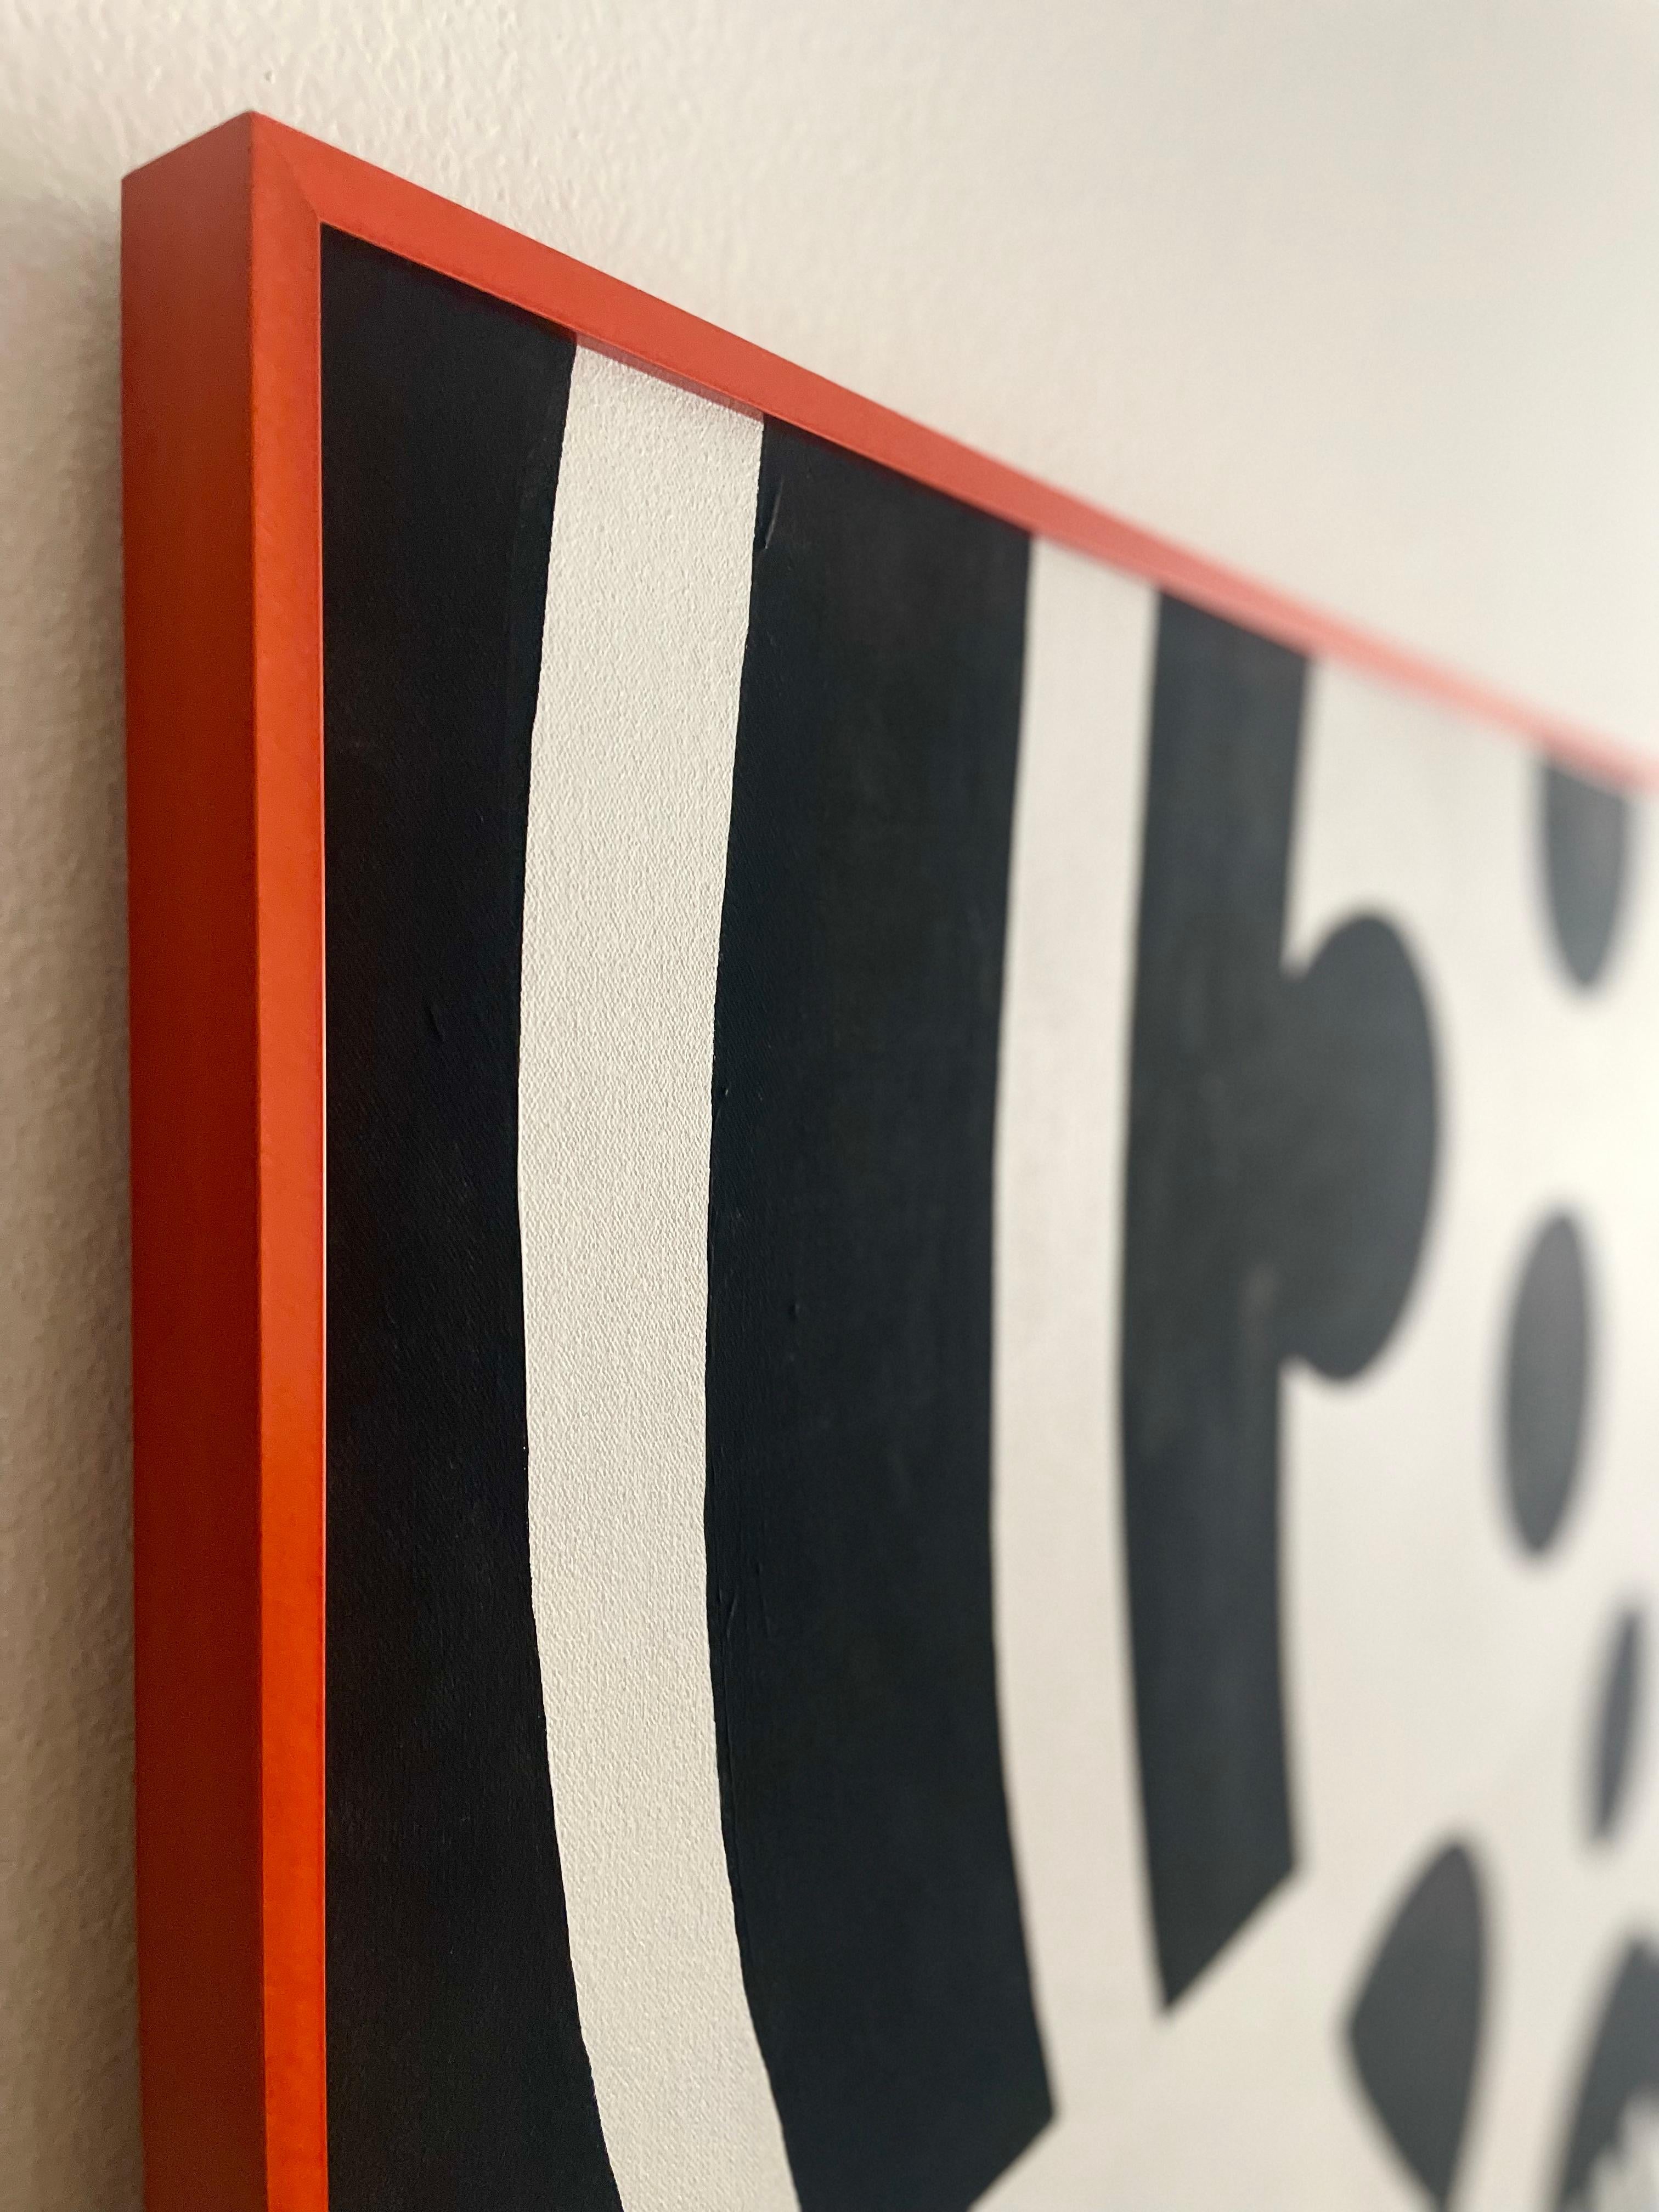 Black and white painting in bright orange frame.

Can be hung vertically or horizontally.

The bright orange aluminum frame is created so the piece looks like it is floating off the wall.

ABOUT LILO
Lilo is a female Danish artist and muralist